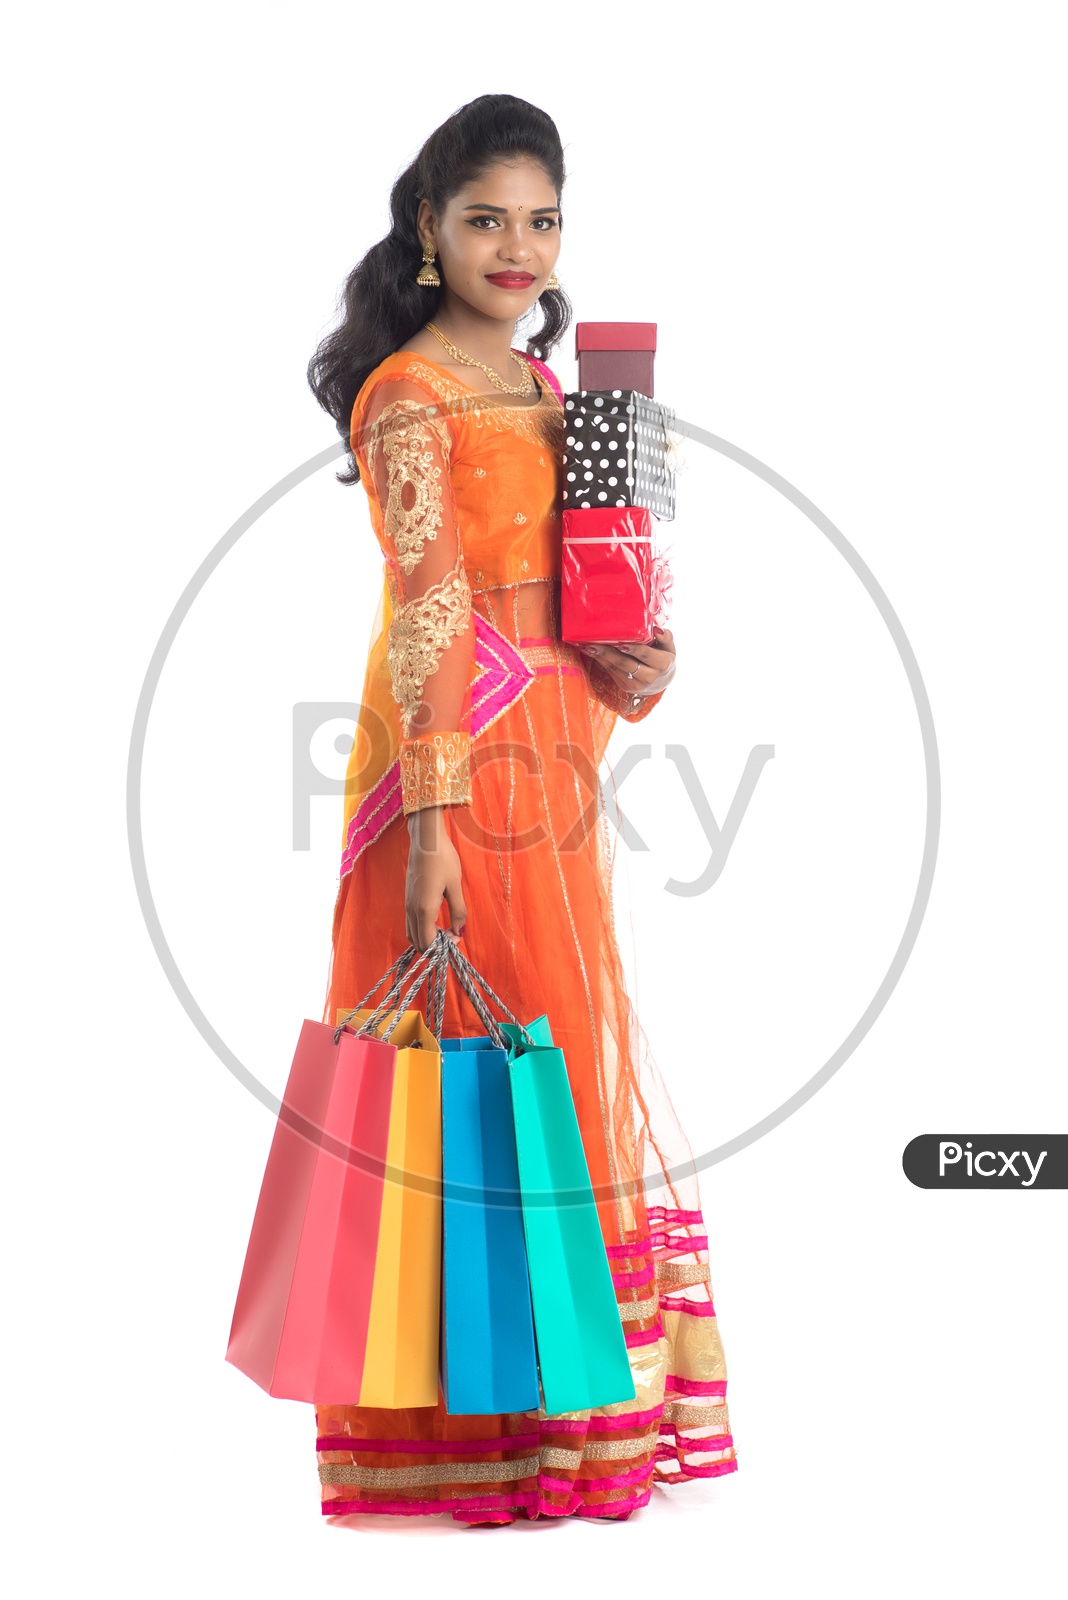 Young Traditional Indian Woman Holding Gift Boxes In hand With a Smile Face On an Isolated White Background